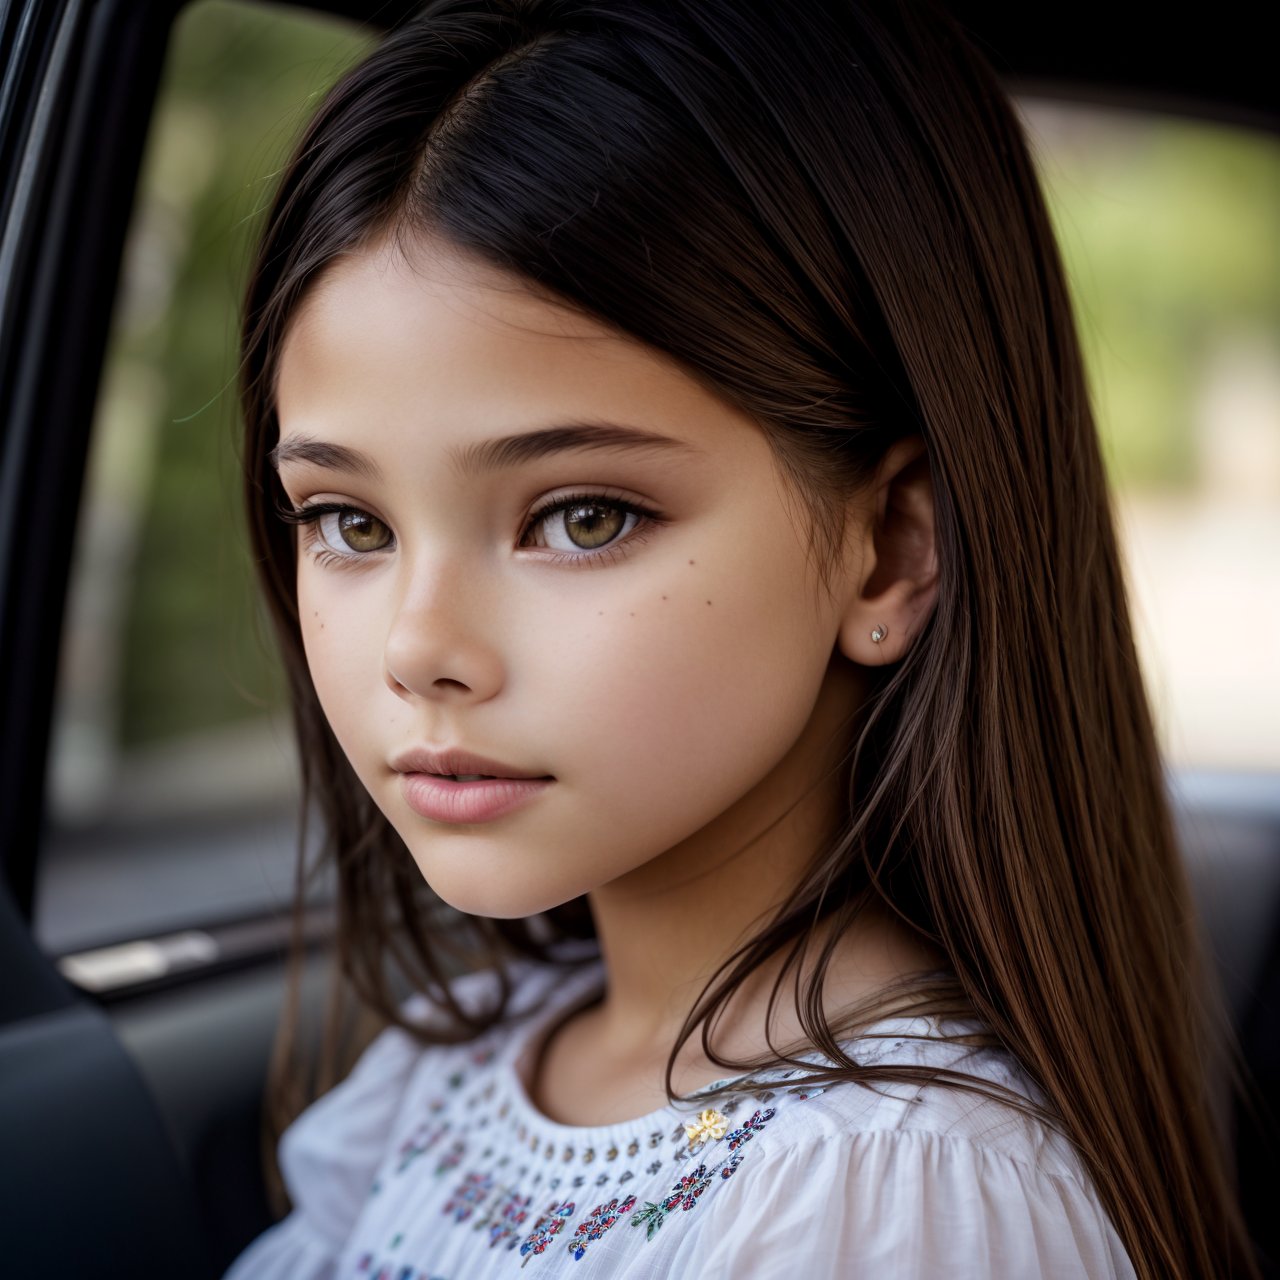 extra resolution, close up portrait of beautiful (AIDA_LoRA_LG2014:1.02) <lora:AIDA_LoRA_LG2014:0.77> wearing a dress, posing in front of the car, on the road, little girl, pretty face, intimate, cinematic, dramatic, insane level of details, intricate pattern, studio photo, studio photo, kkw-ph1, hdr, f1.7, (colorful:1.1)